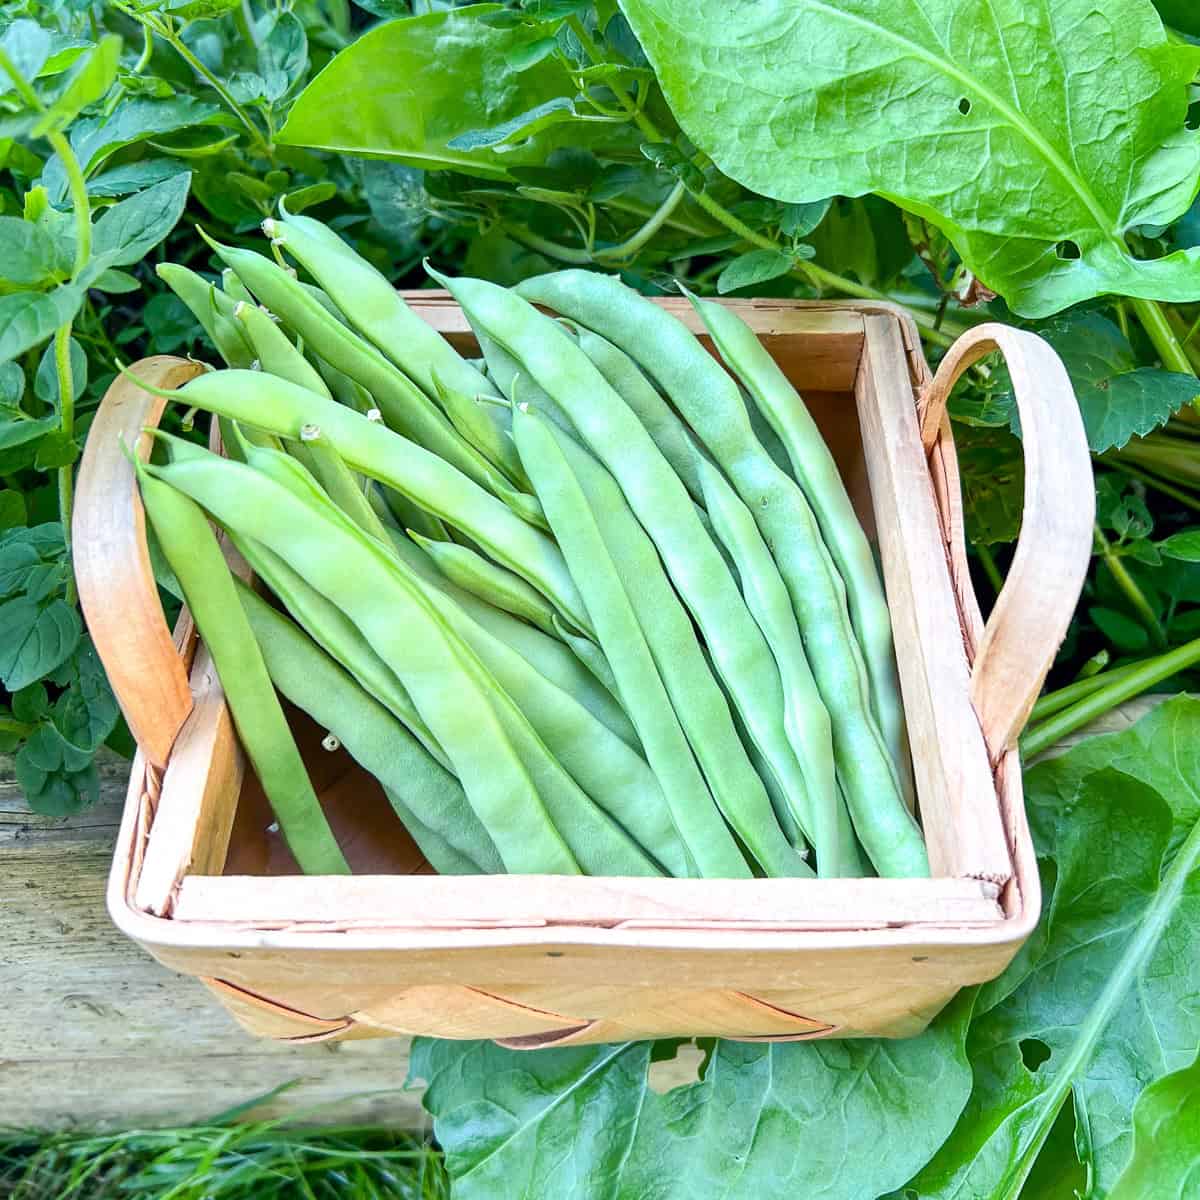 A harvesting basket filled with pole beans.